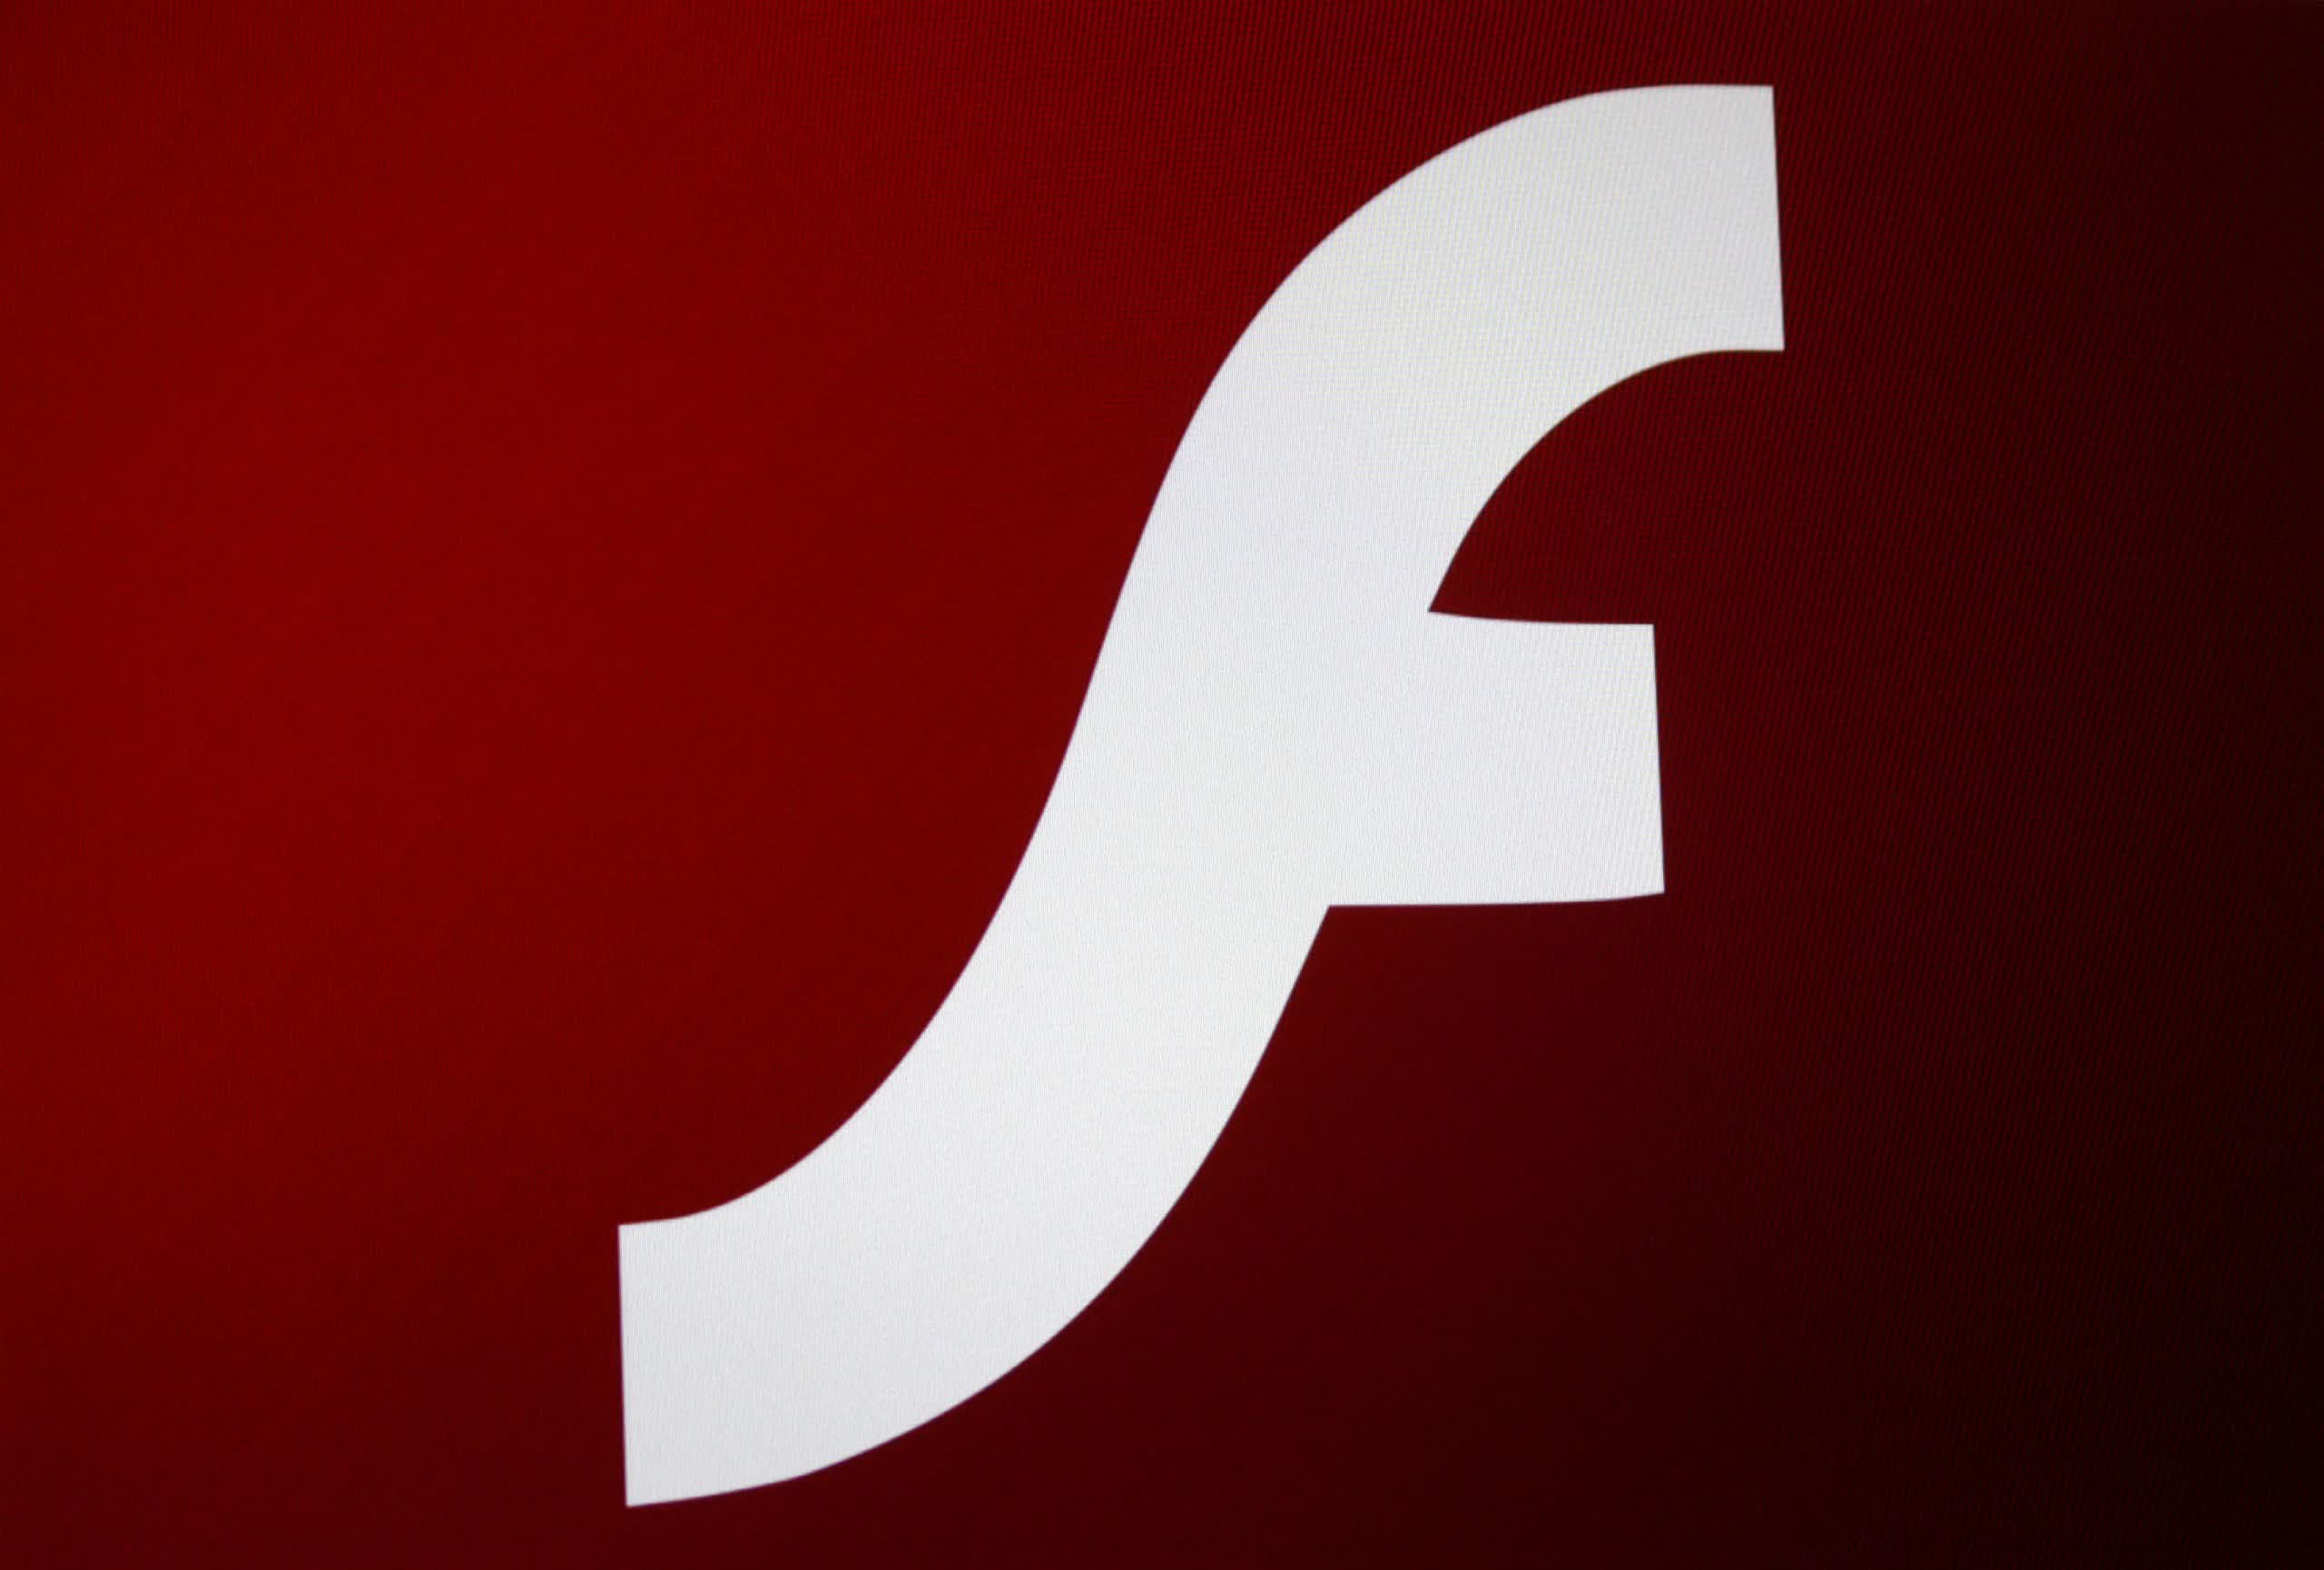 Adobe has released the final update for Flash Player